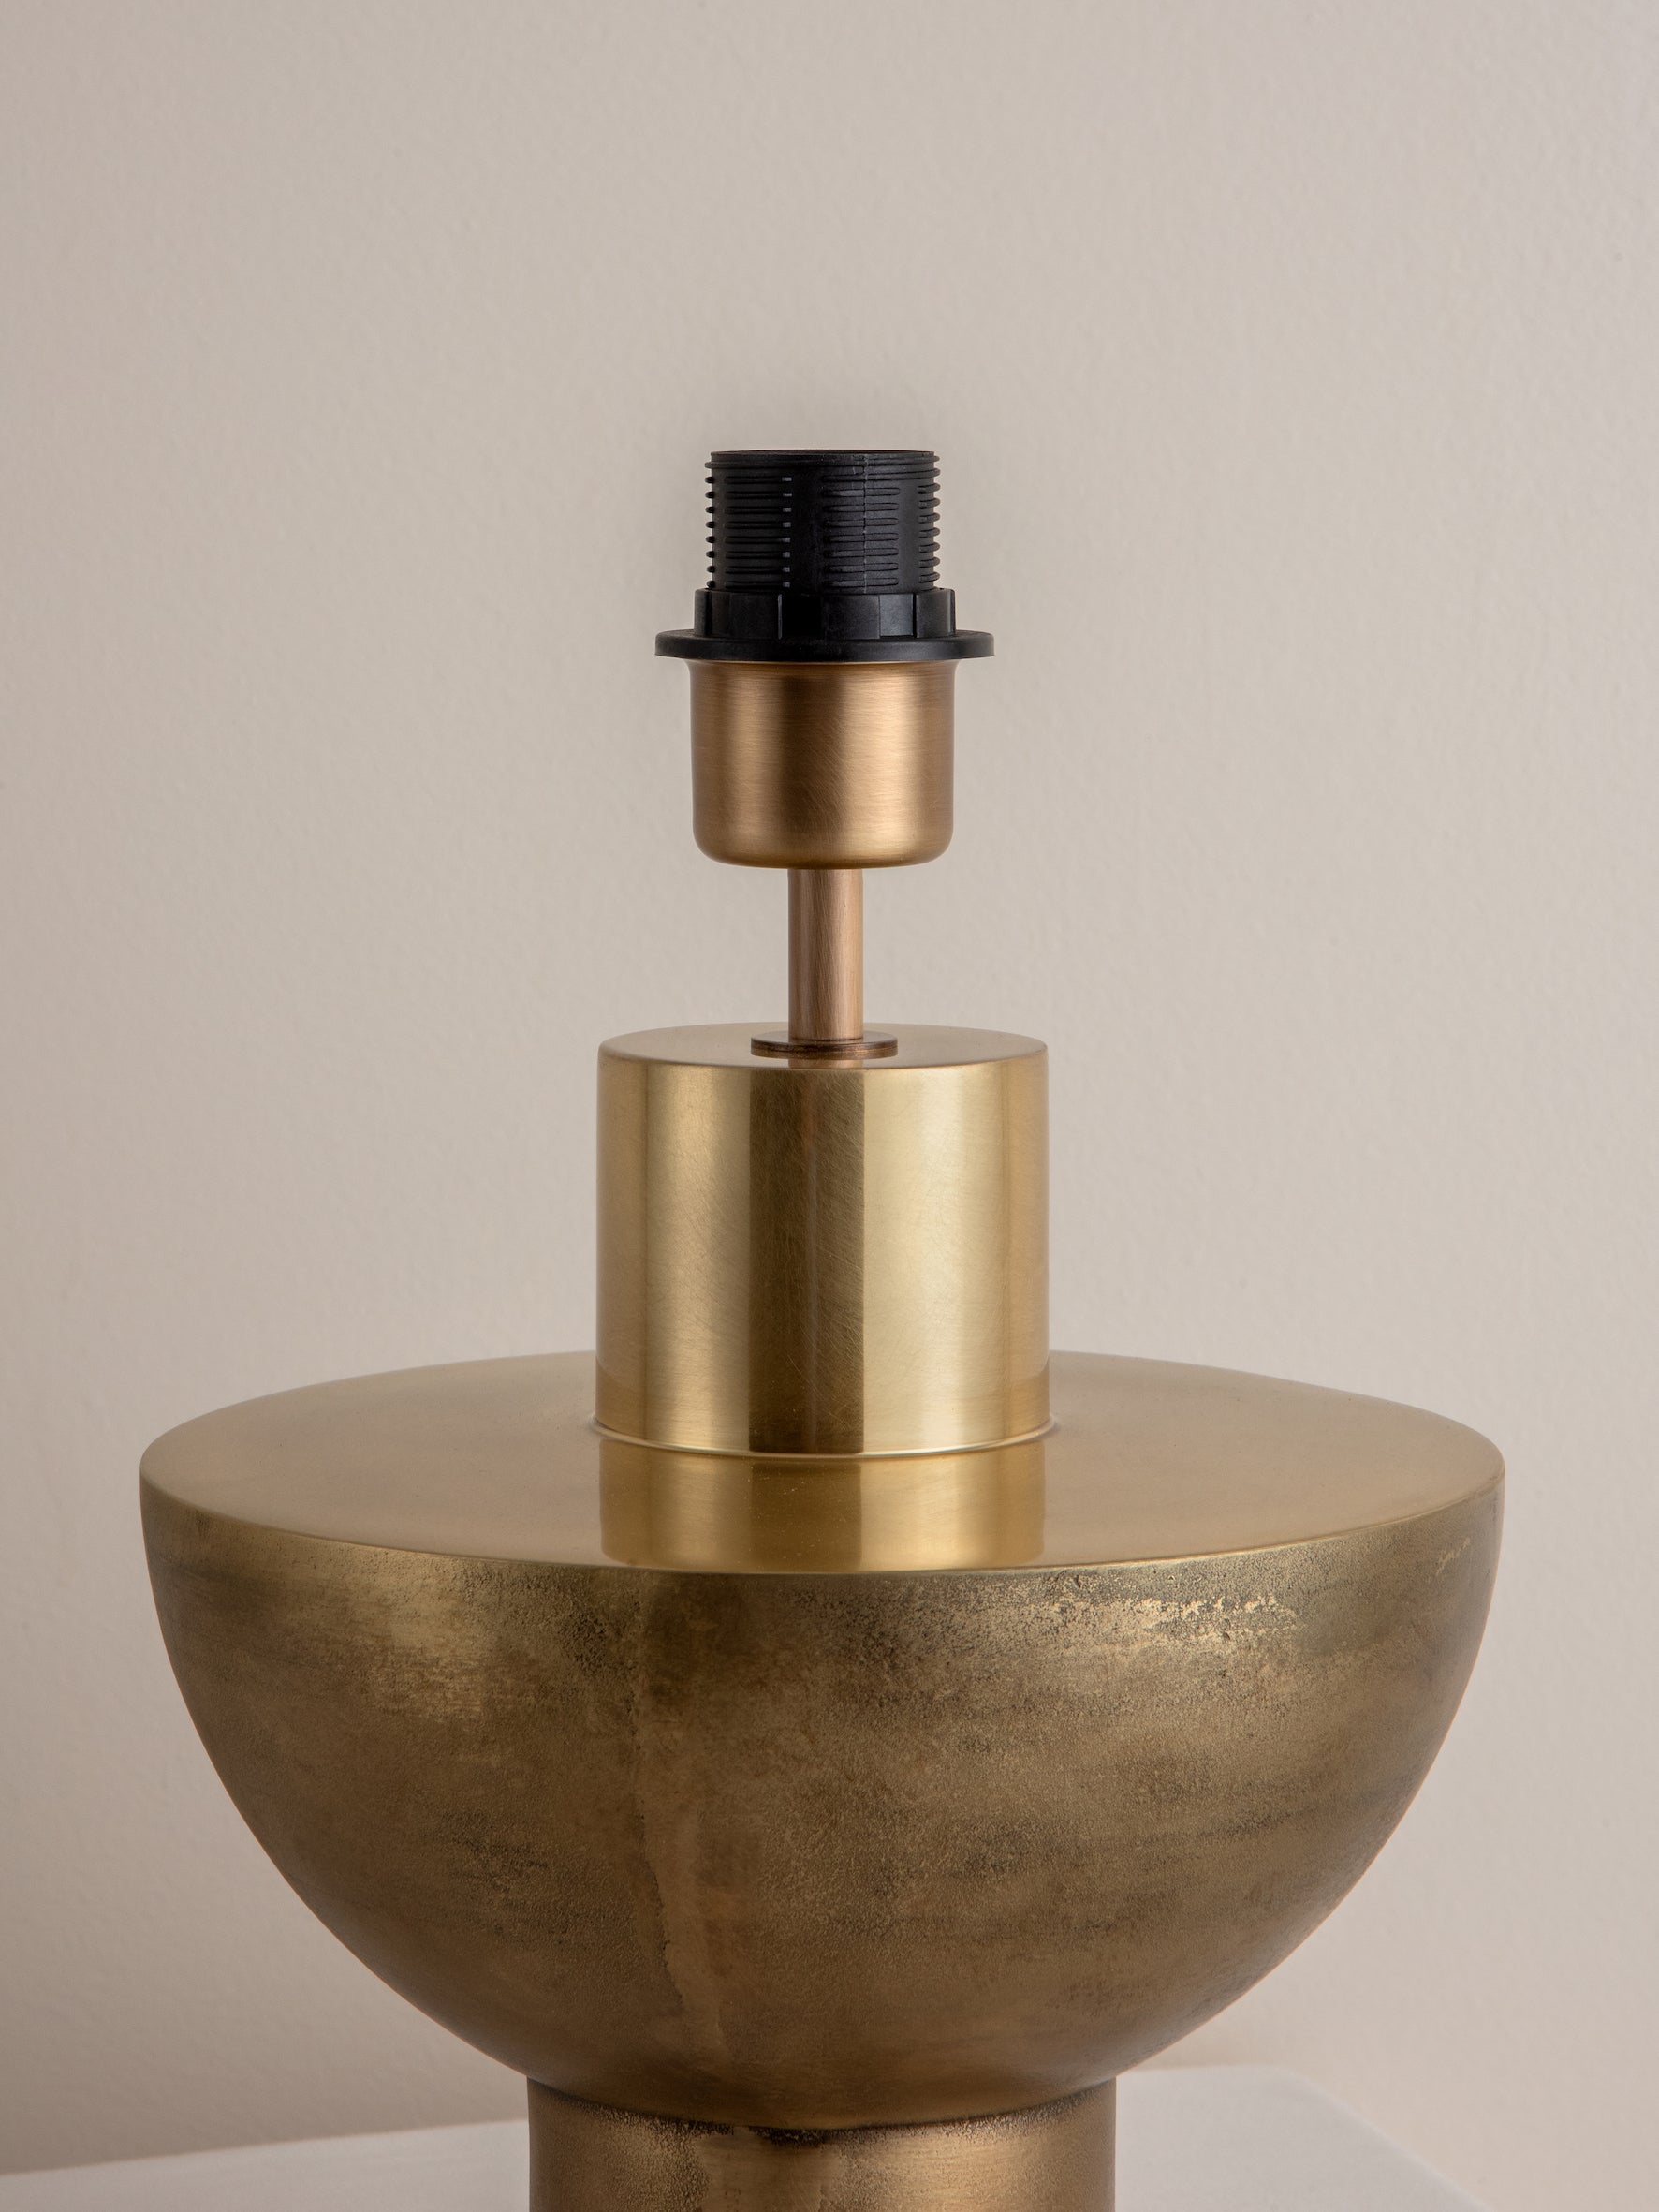 Editions brass lamp with + aged brass shade | Table Lamp | Lights & Lamps | UK | Modern Affordable Designer Lighting